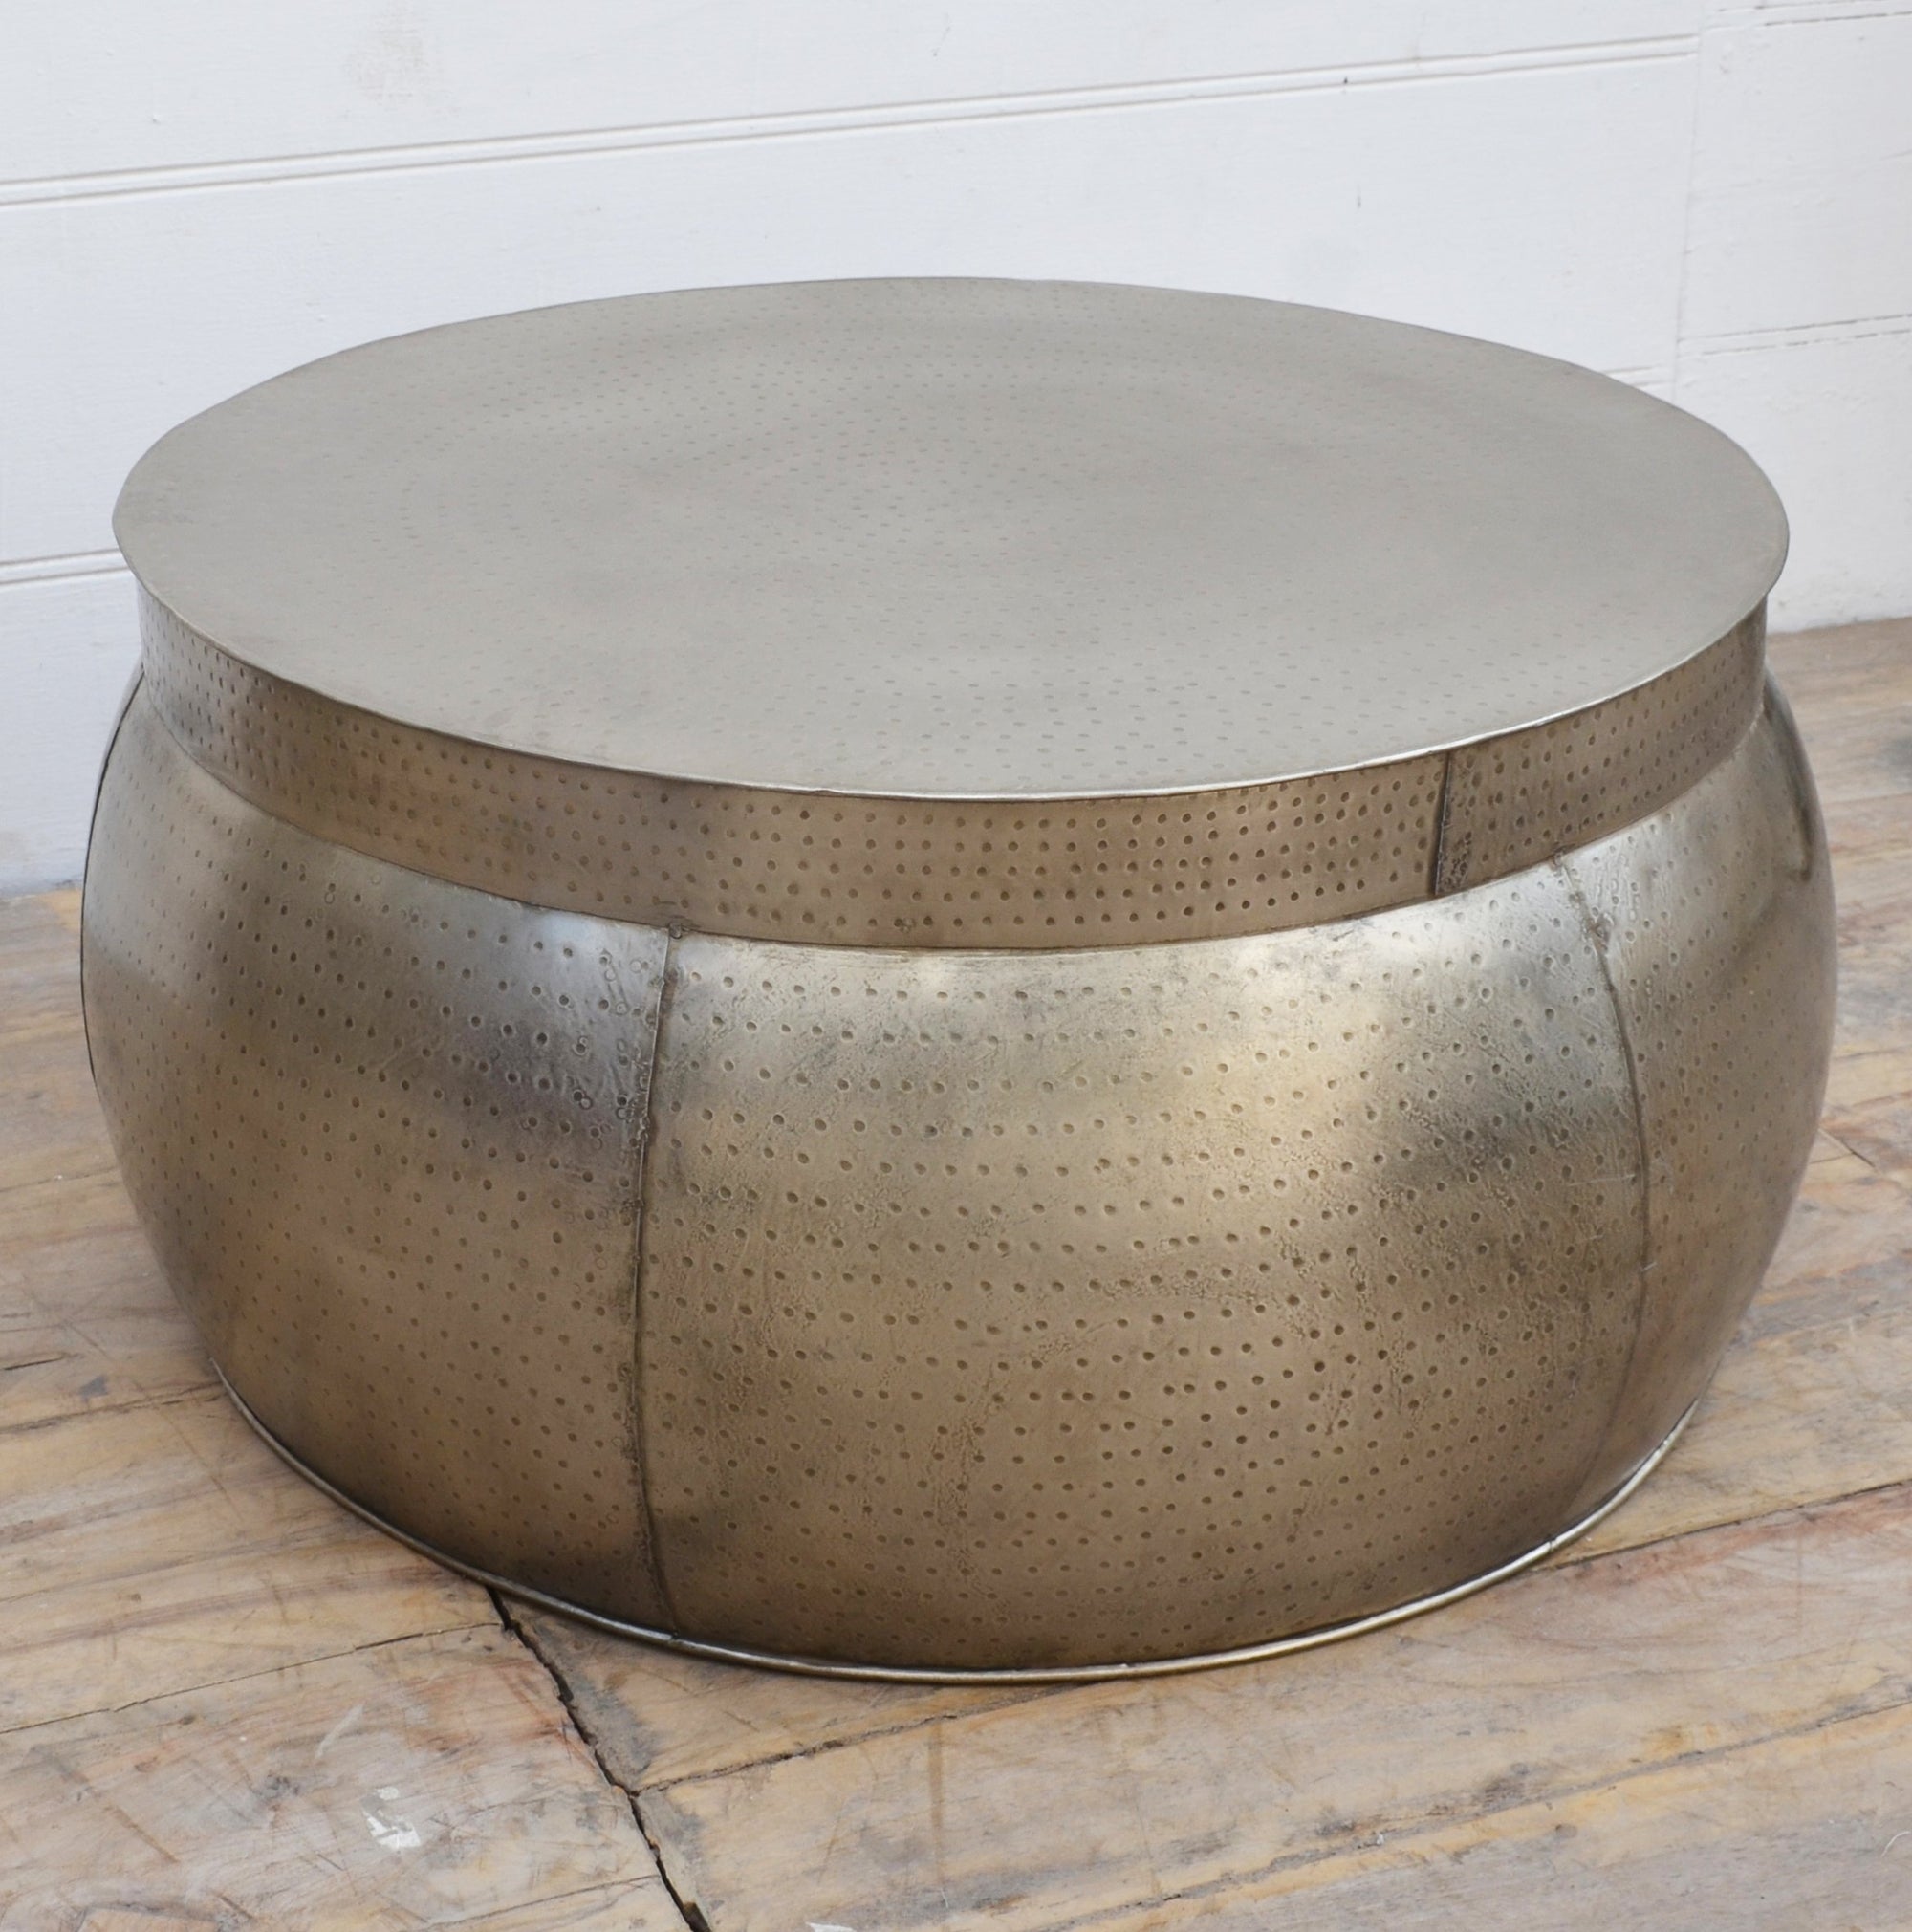 Hammered Metallic Coffee Table - decorstore